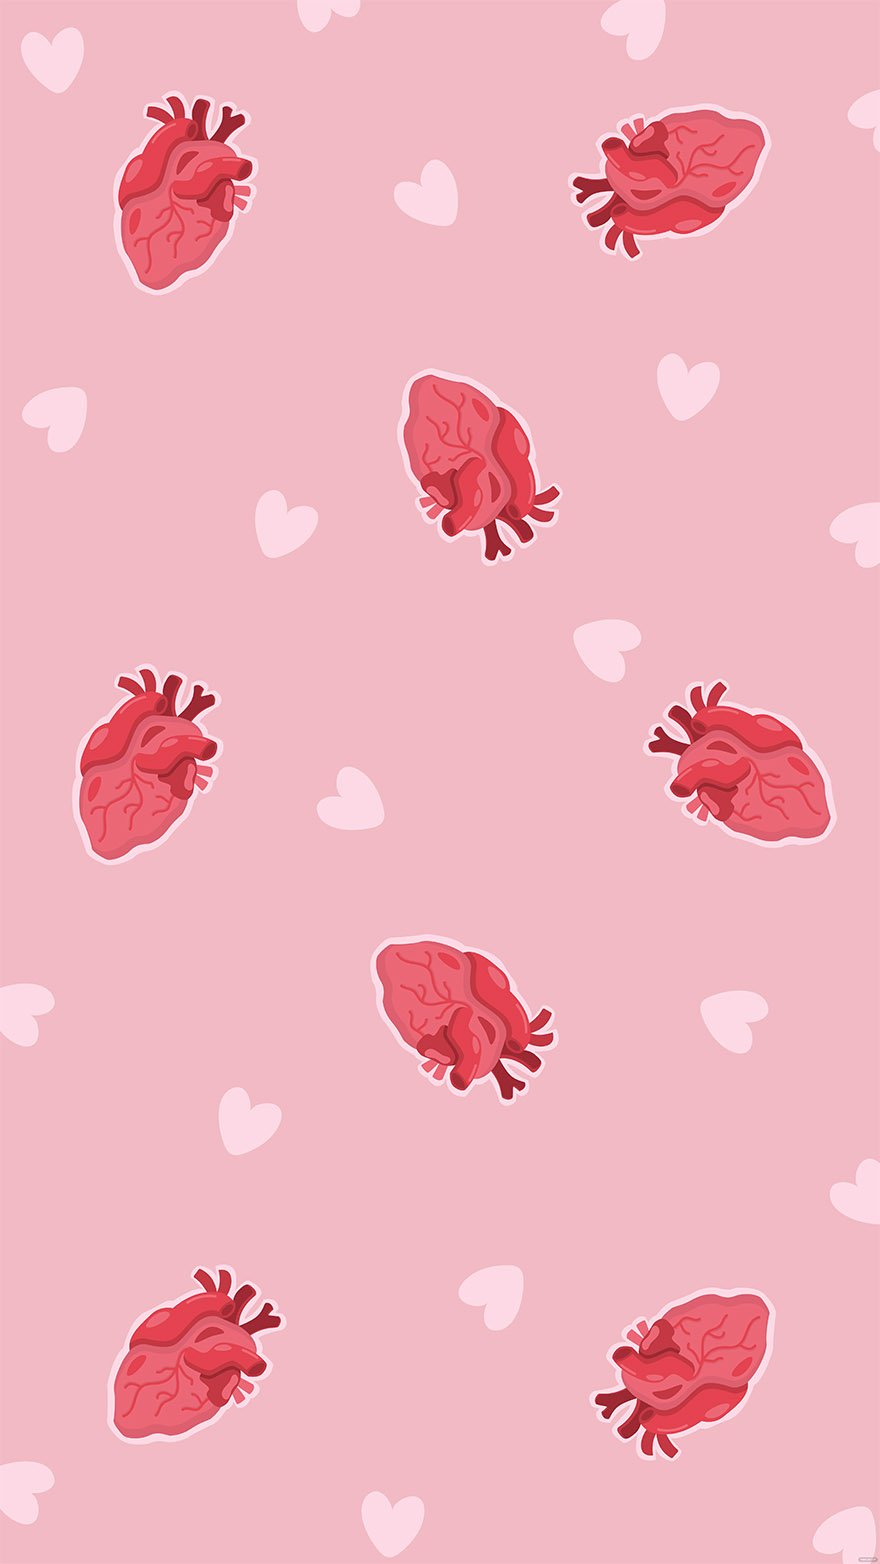 heart backgrounds ideas and examples